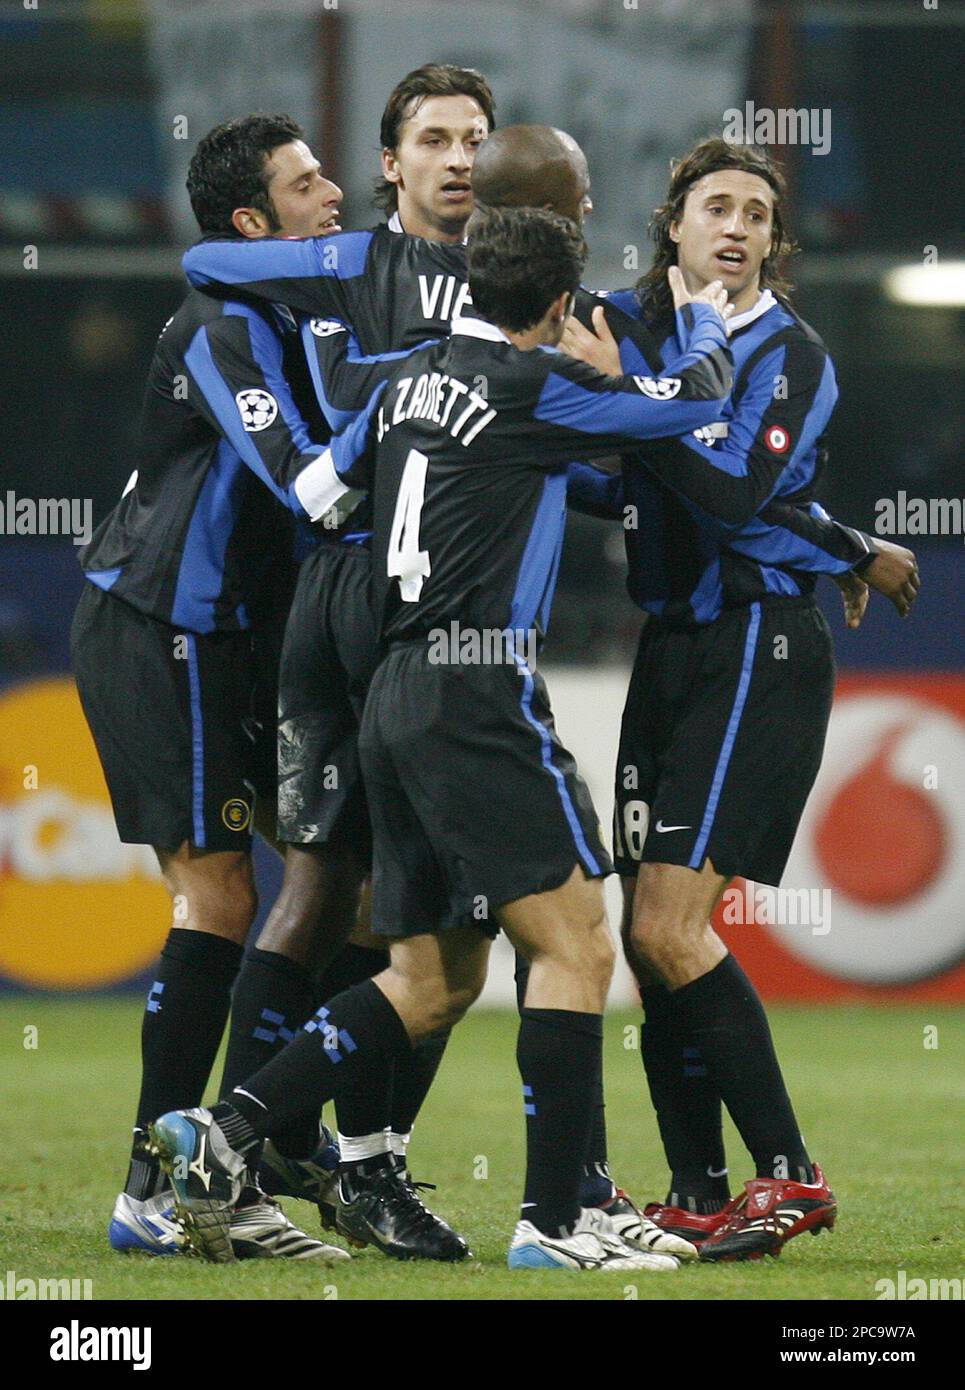 Inter Milan forward Hernan Crespo of Argentina, right, celebrates with his  teammates Fabio Grosso, left, Zlatan Ibrahimovic, center, of Sweden,  Patrick Vieira of France and Javier Zanetti of Argentina, back to camera,